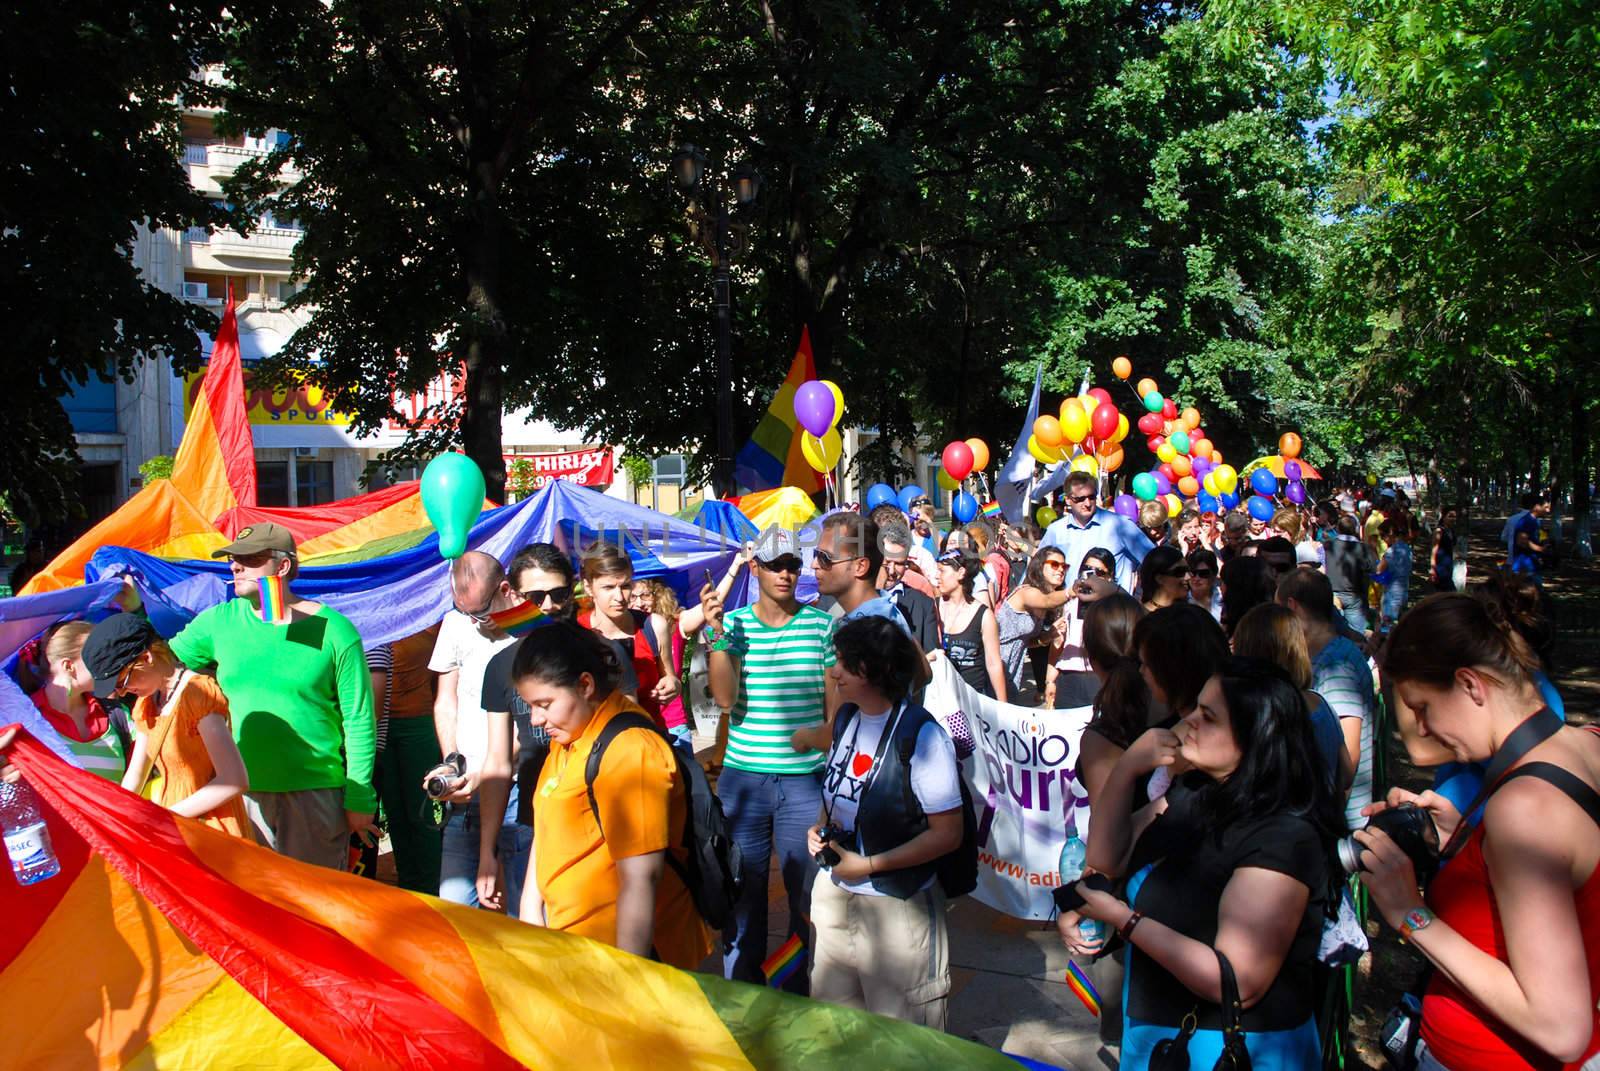 Participants parade at Gay Fest Parade May 23, 2009 in Bucharest, Romania.